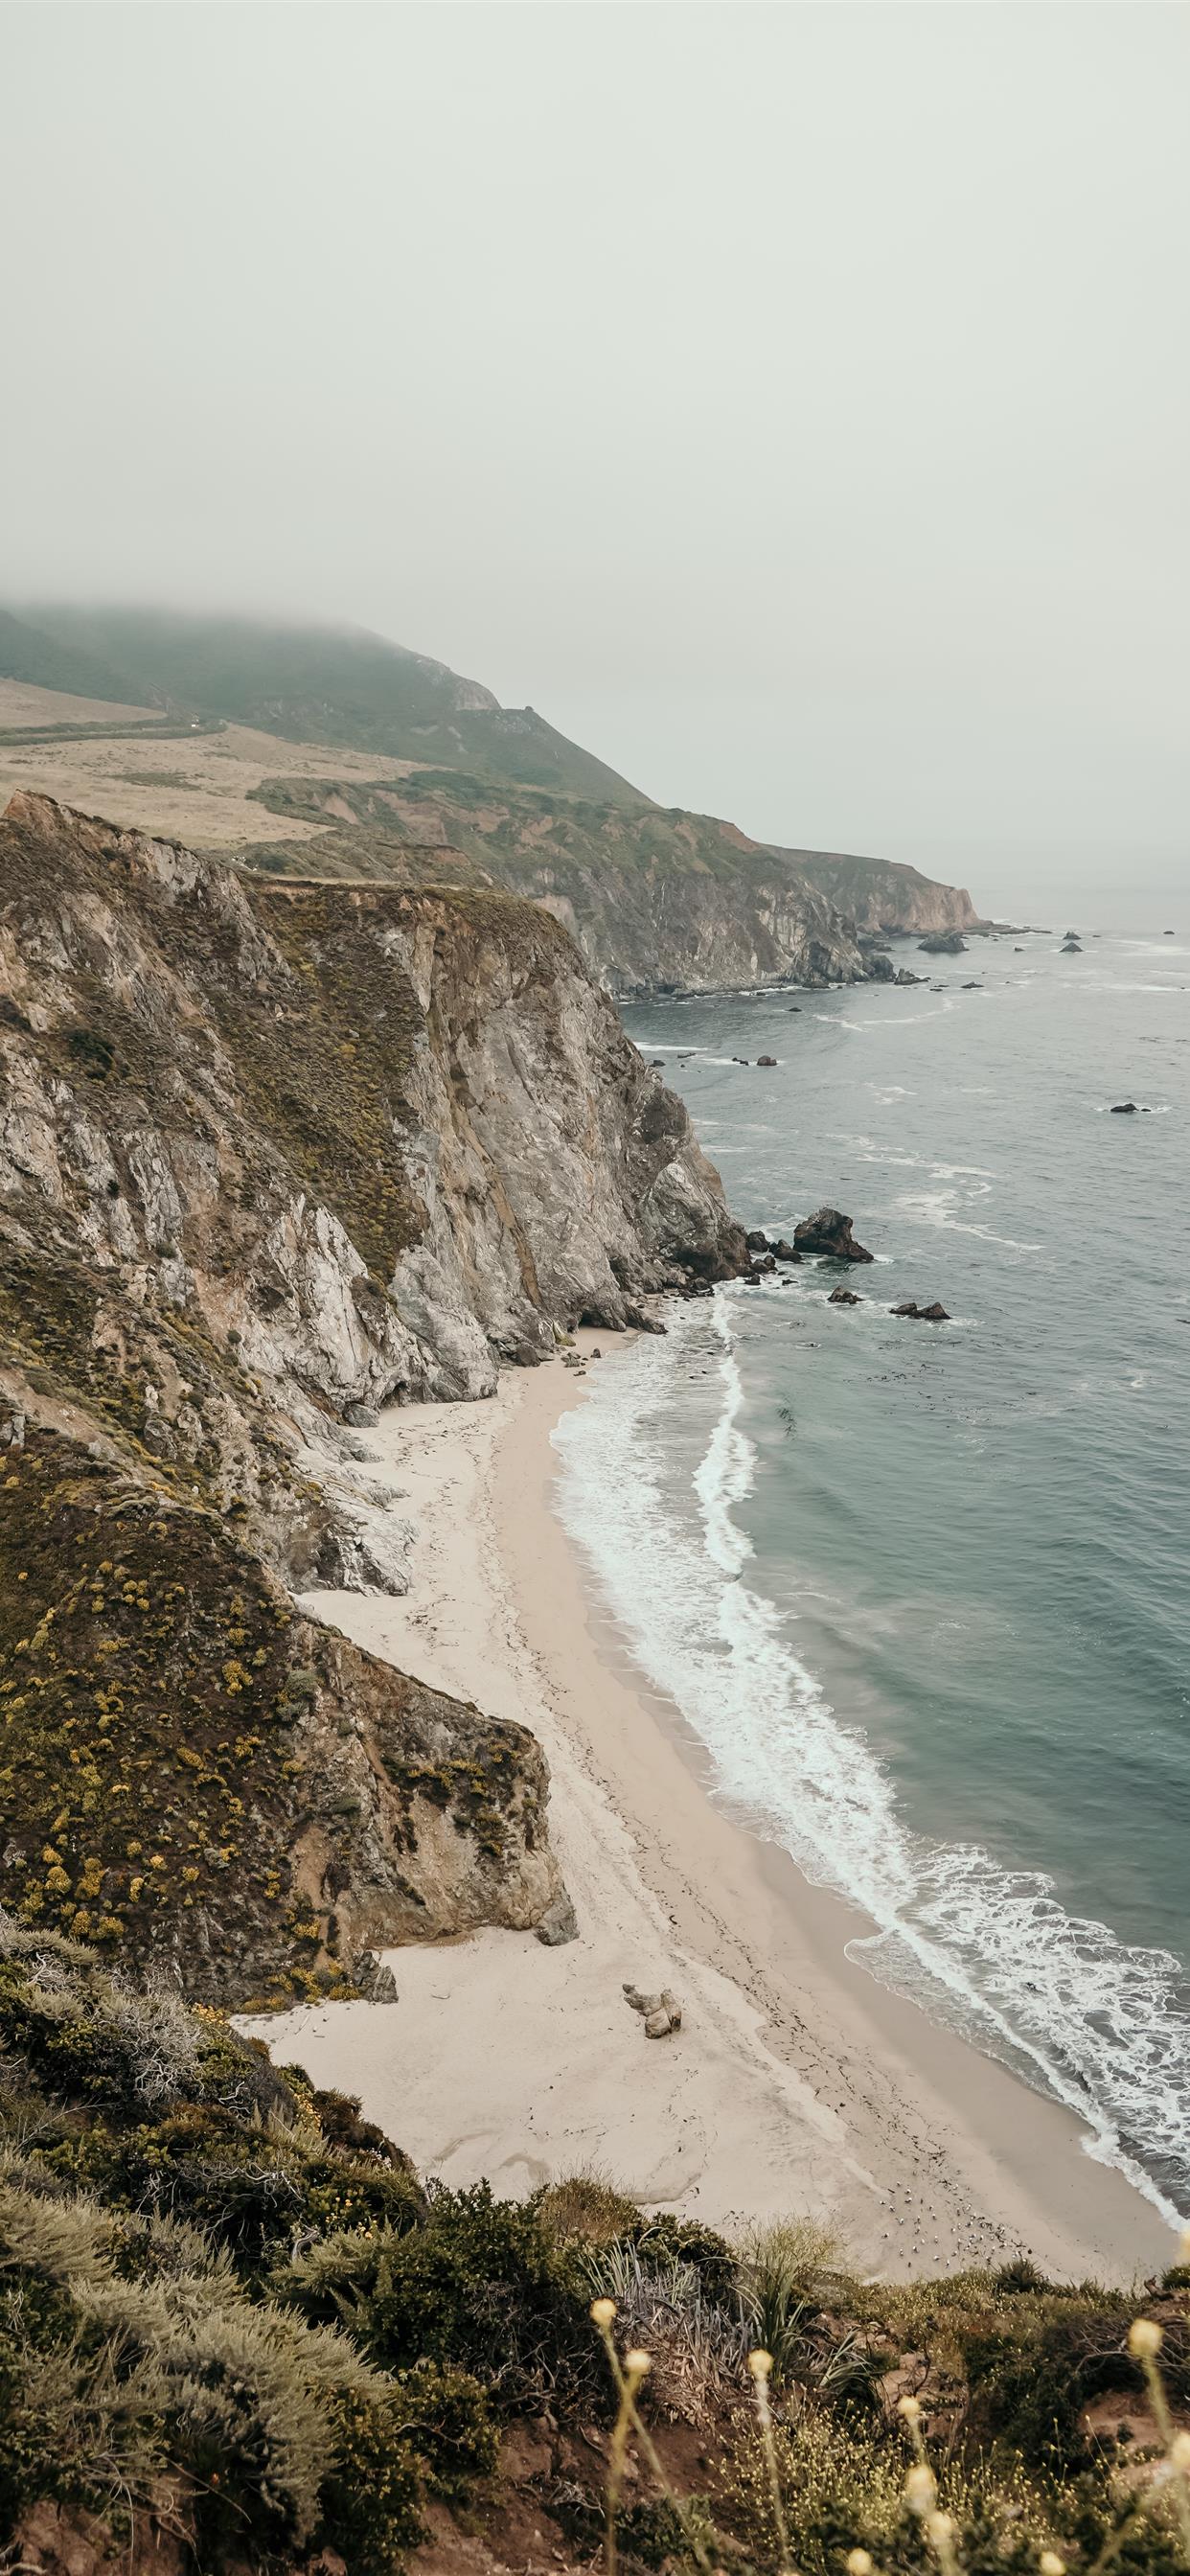 free Big Sur for iphone download